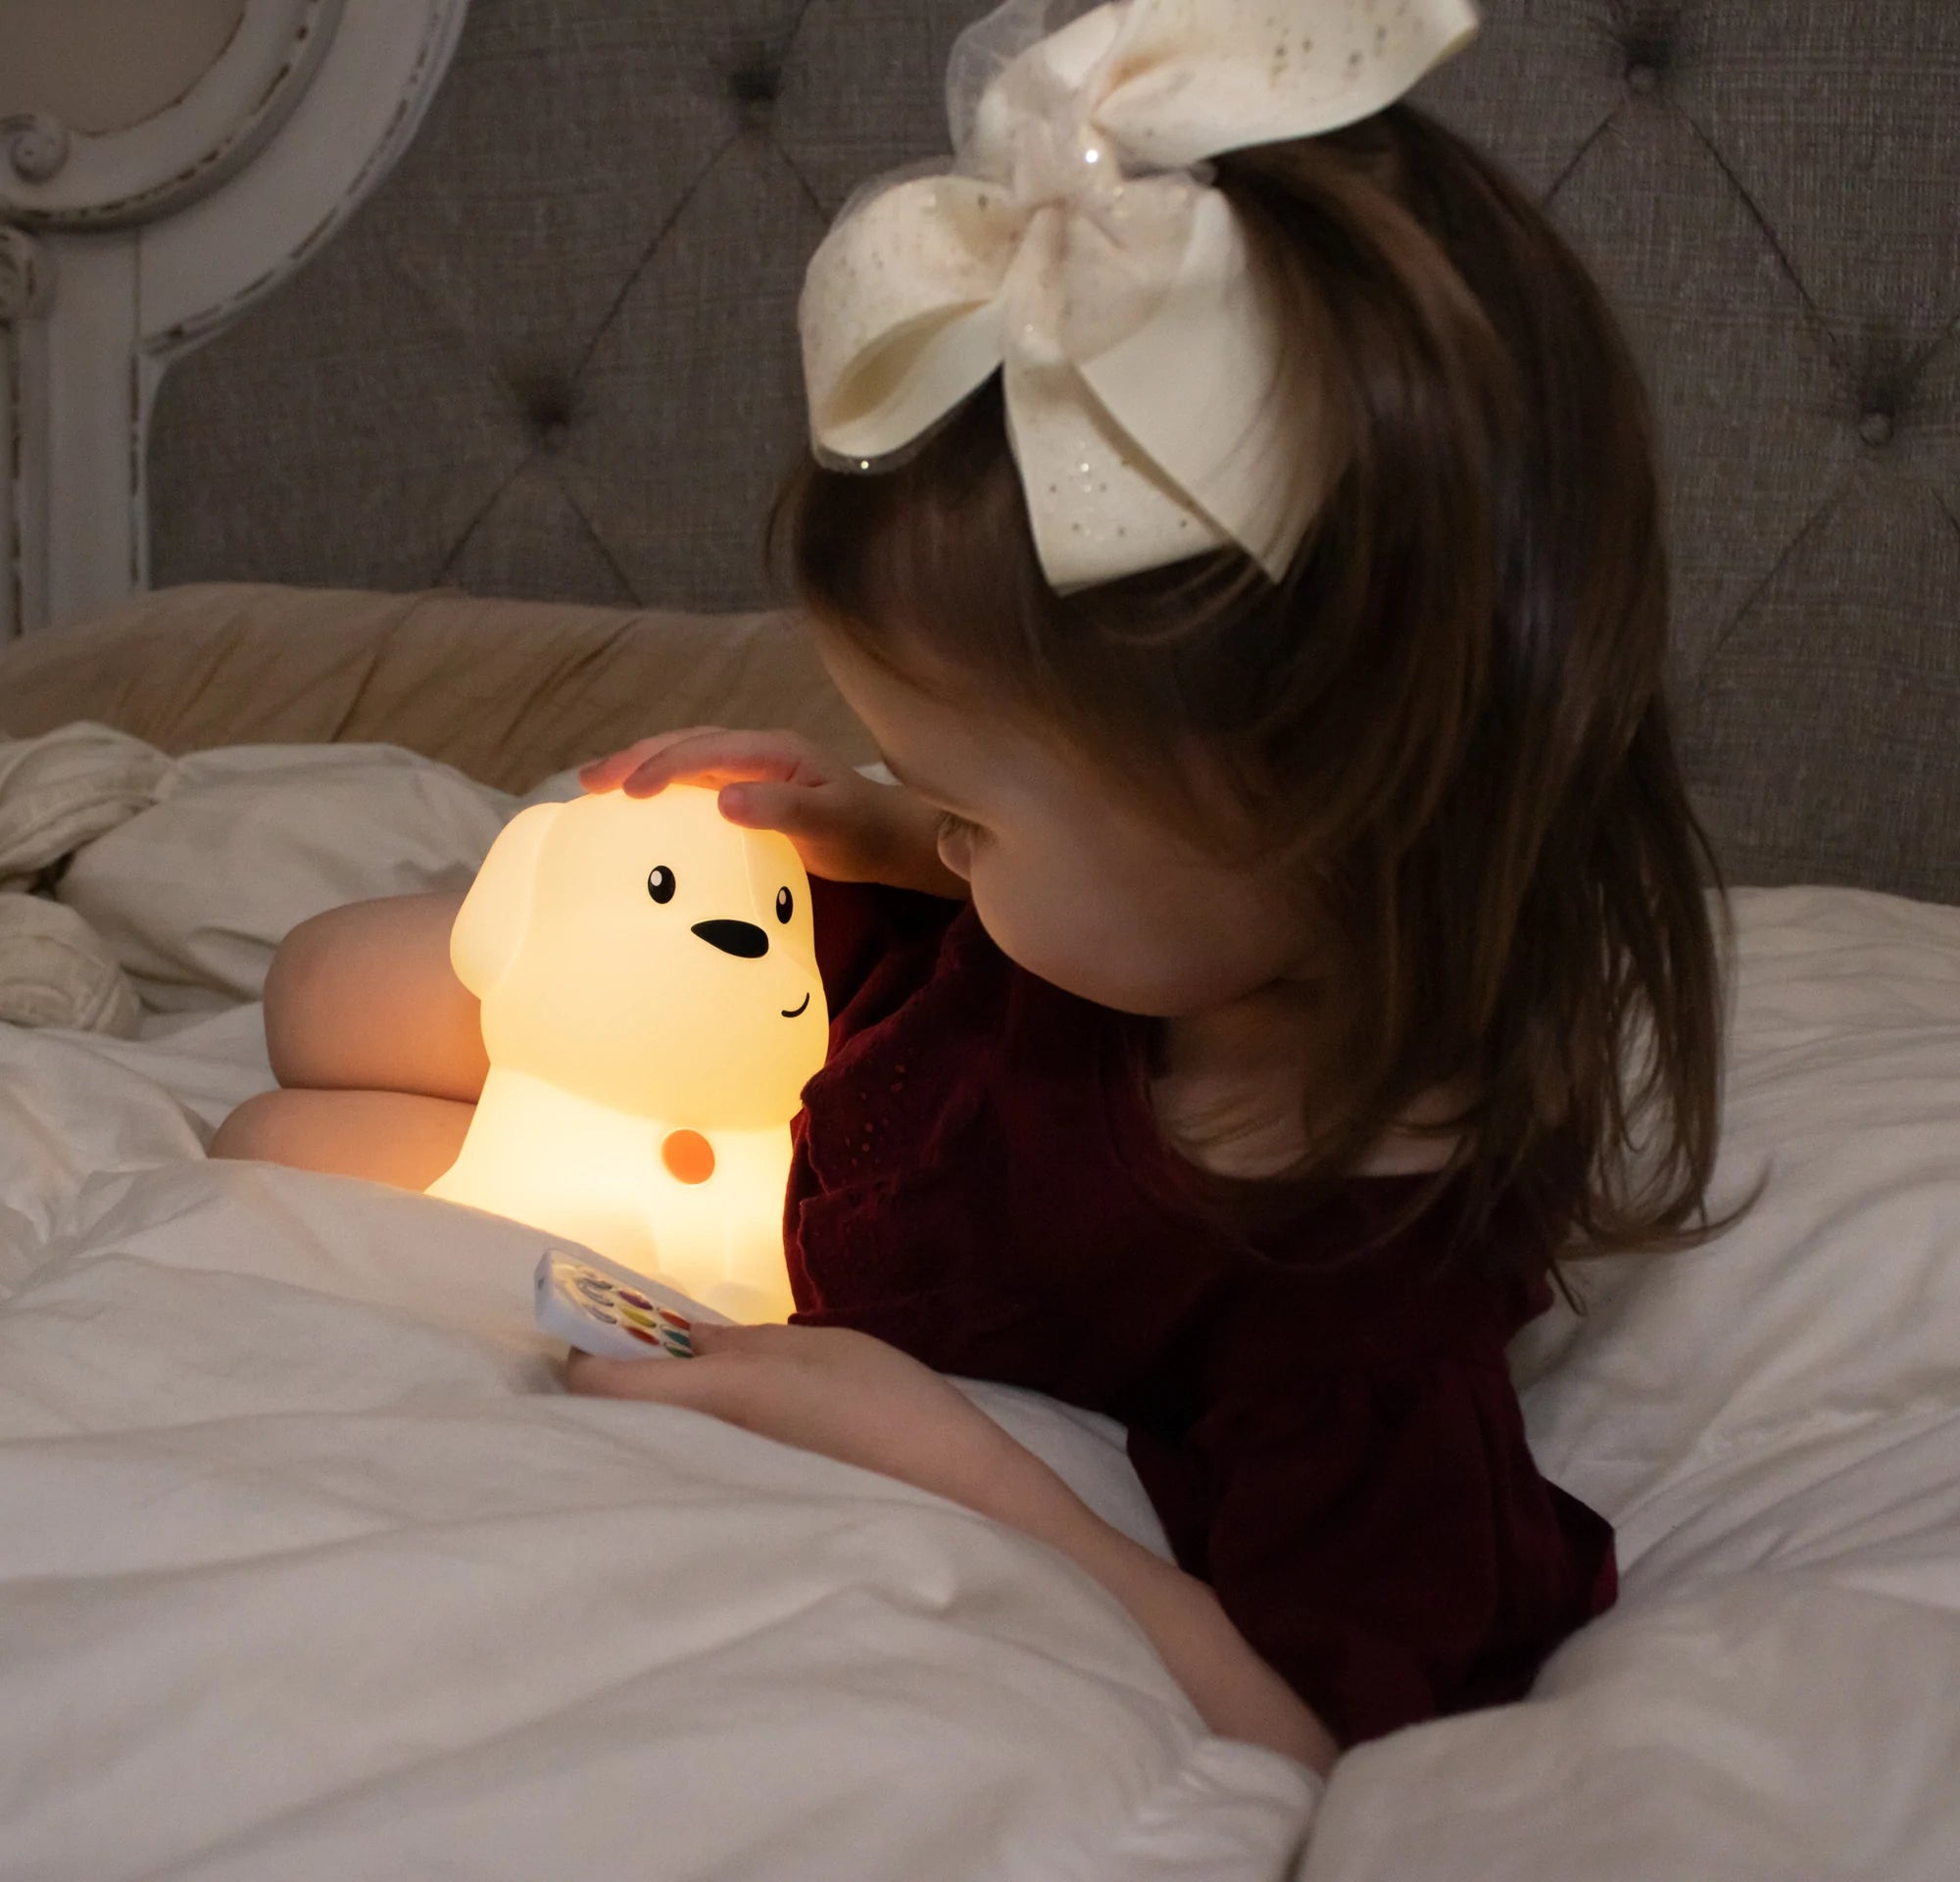 Lumieworld Kids' Night Light Puppy Lamp with Remote - ANB Baby -860003567364$20 - $50